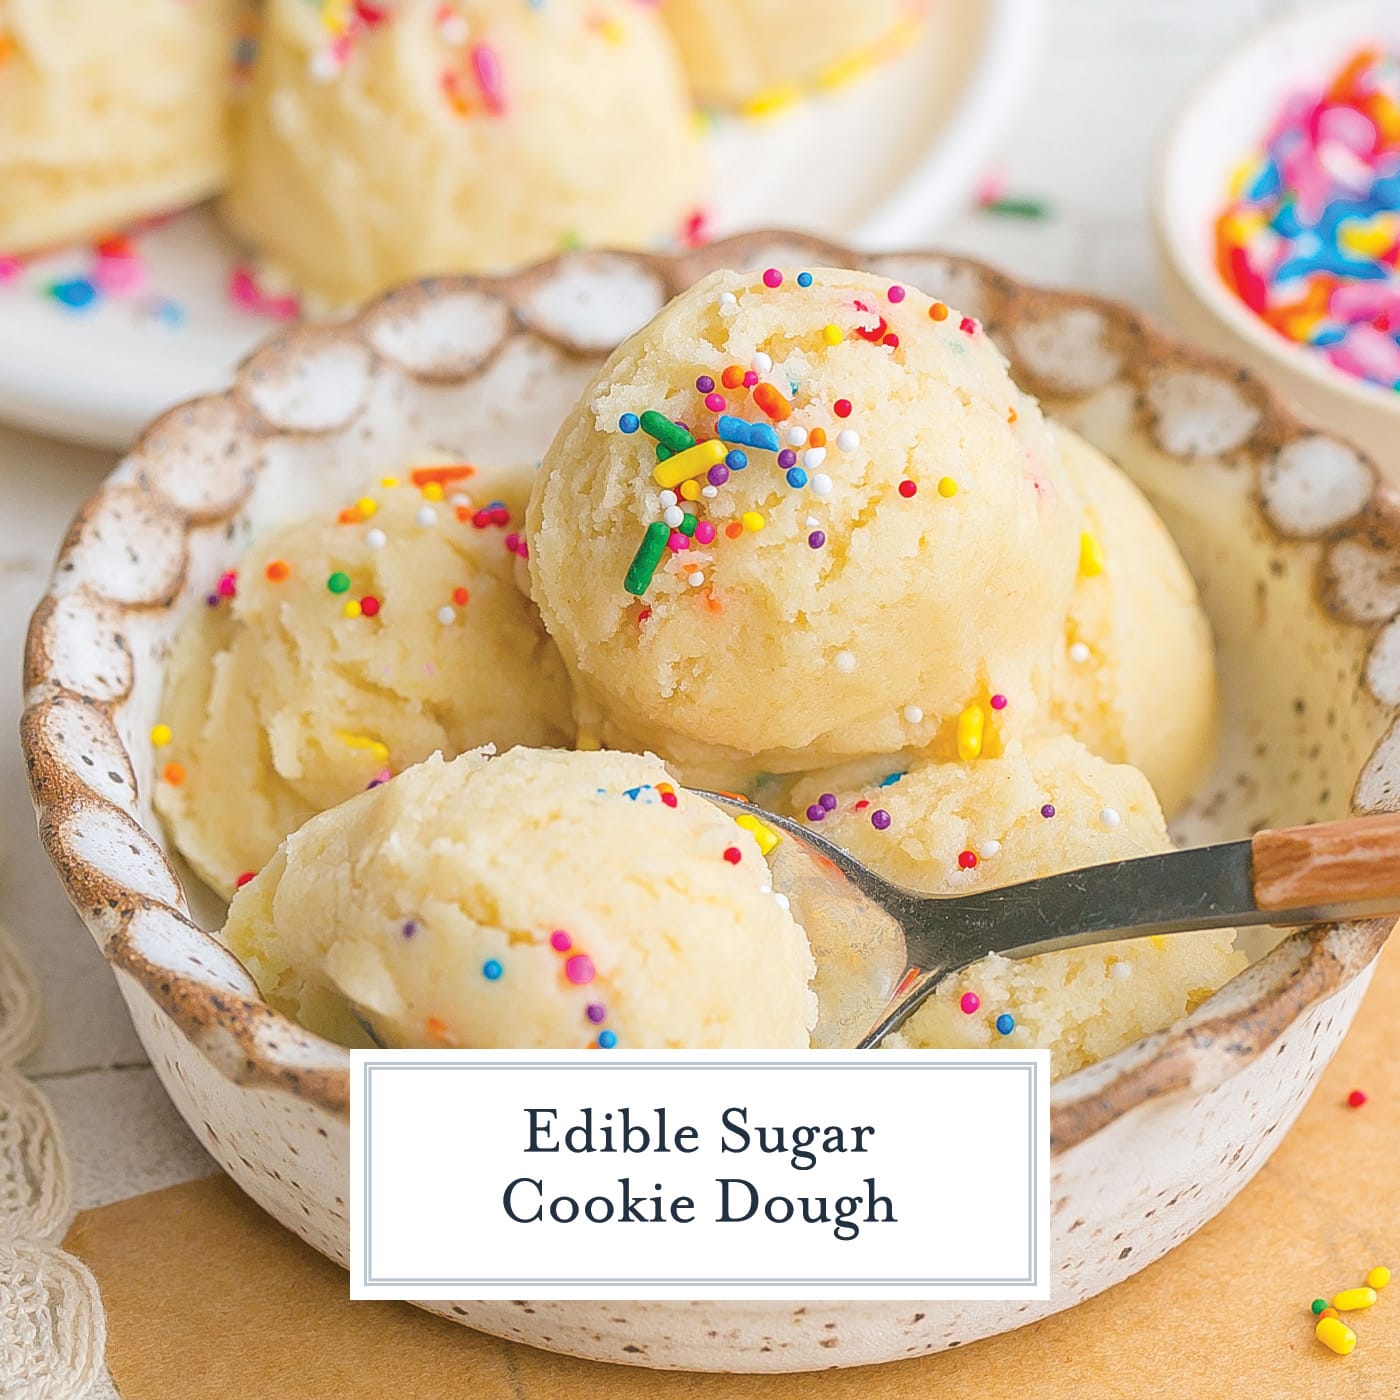 Crazy Cookie Dough: One Easy Cookie Recipe w/ Endless Flavors!